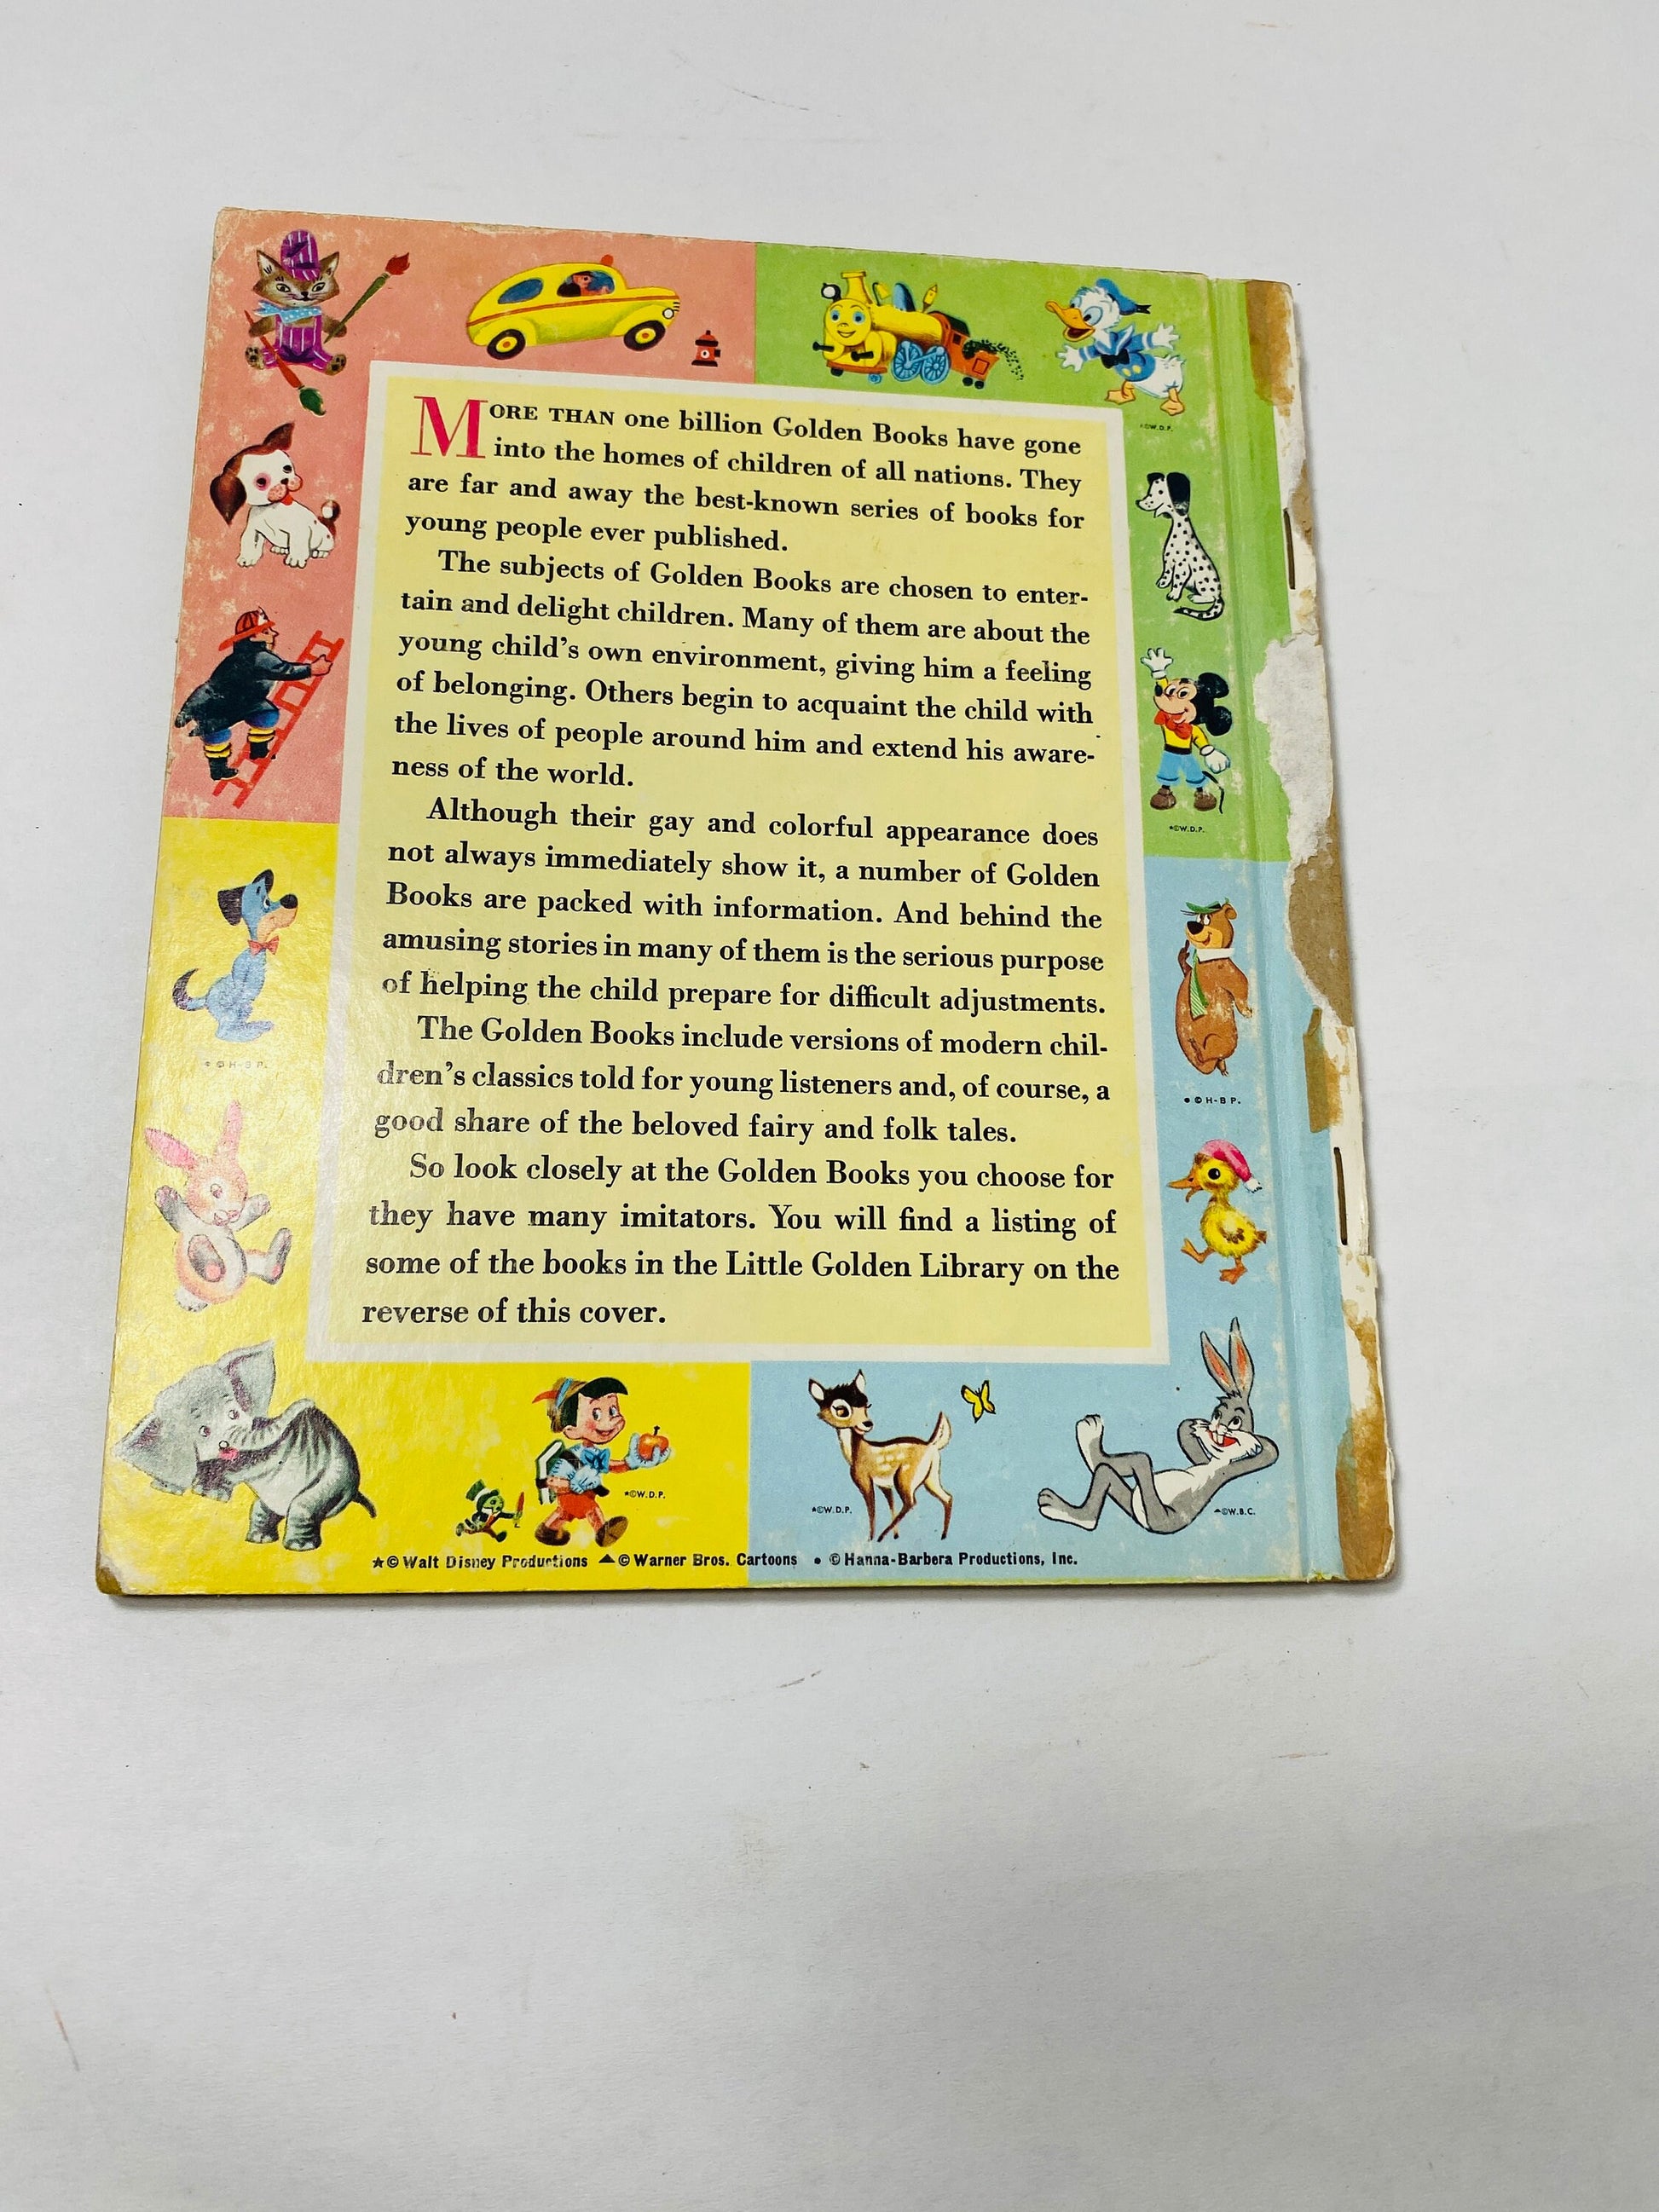 1958 Rudolph the Red-Nosed Reindeer vintage Little Golden Book FIRST PRINTING Barbara Shook Hazen Illustrated by Richard Scarry